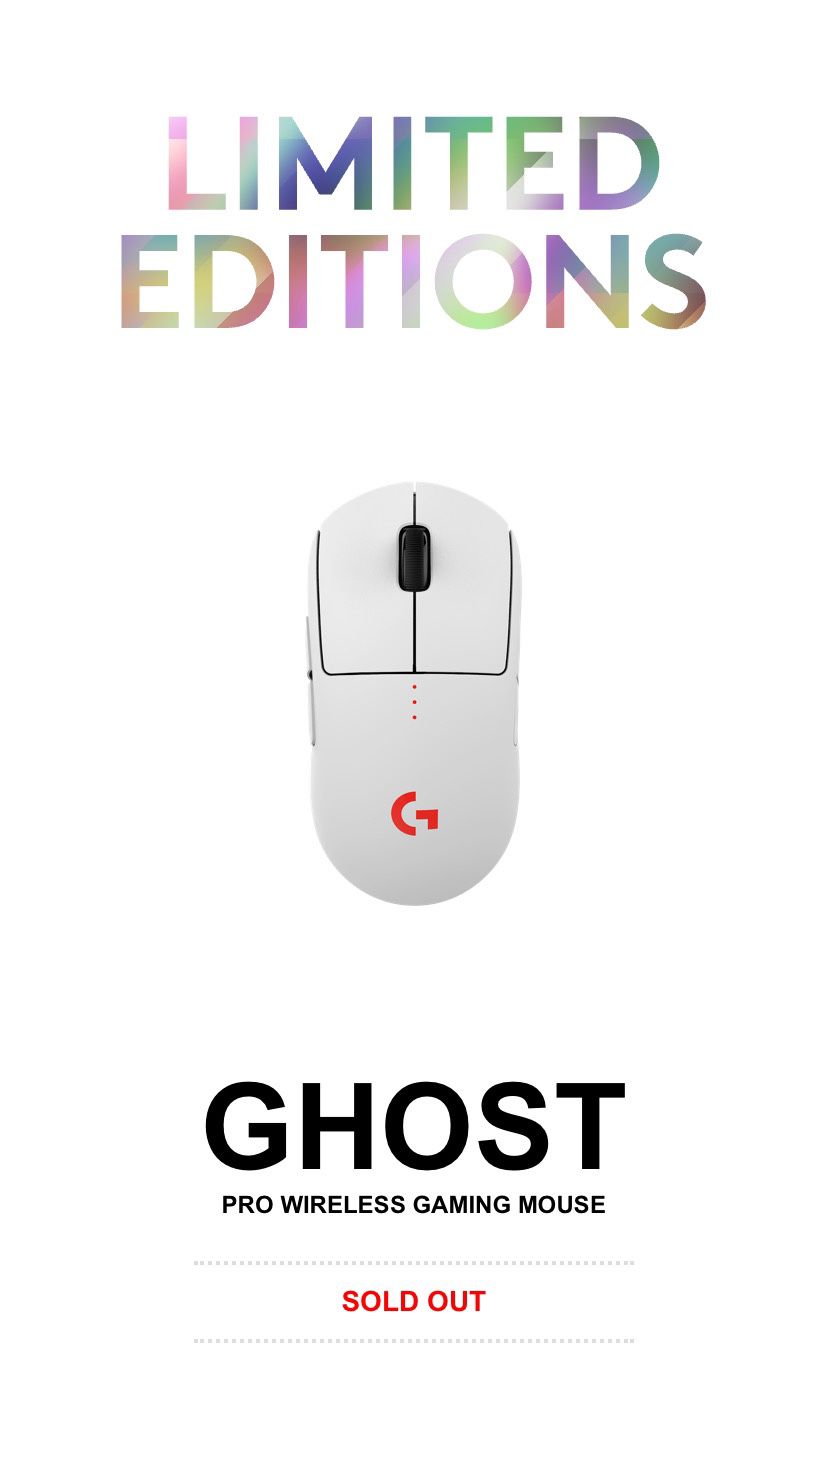 Logitech Ghost Wireless Gaming Mouse